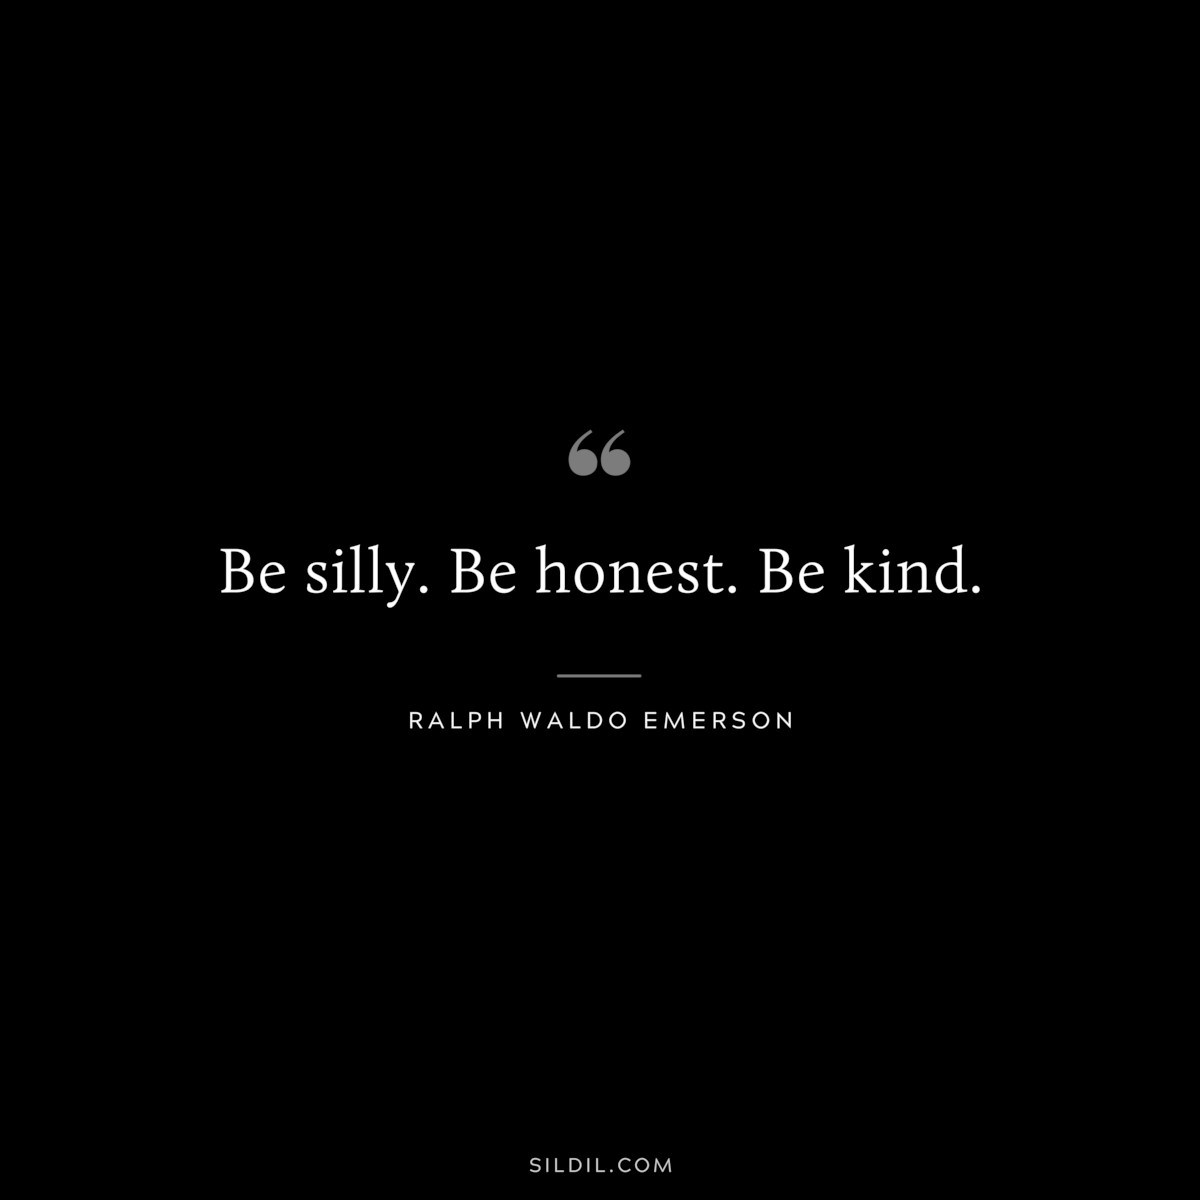 Be silly. Be honest. Be kind. — Ralph Waldo Emerson